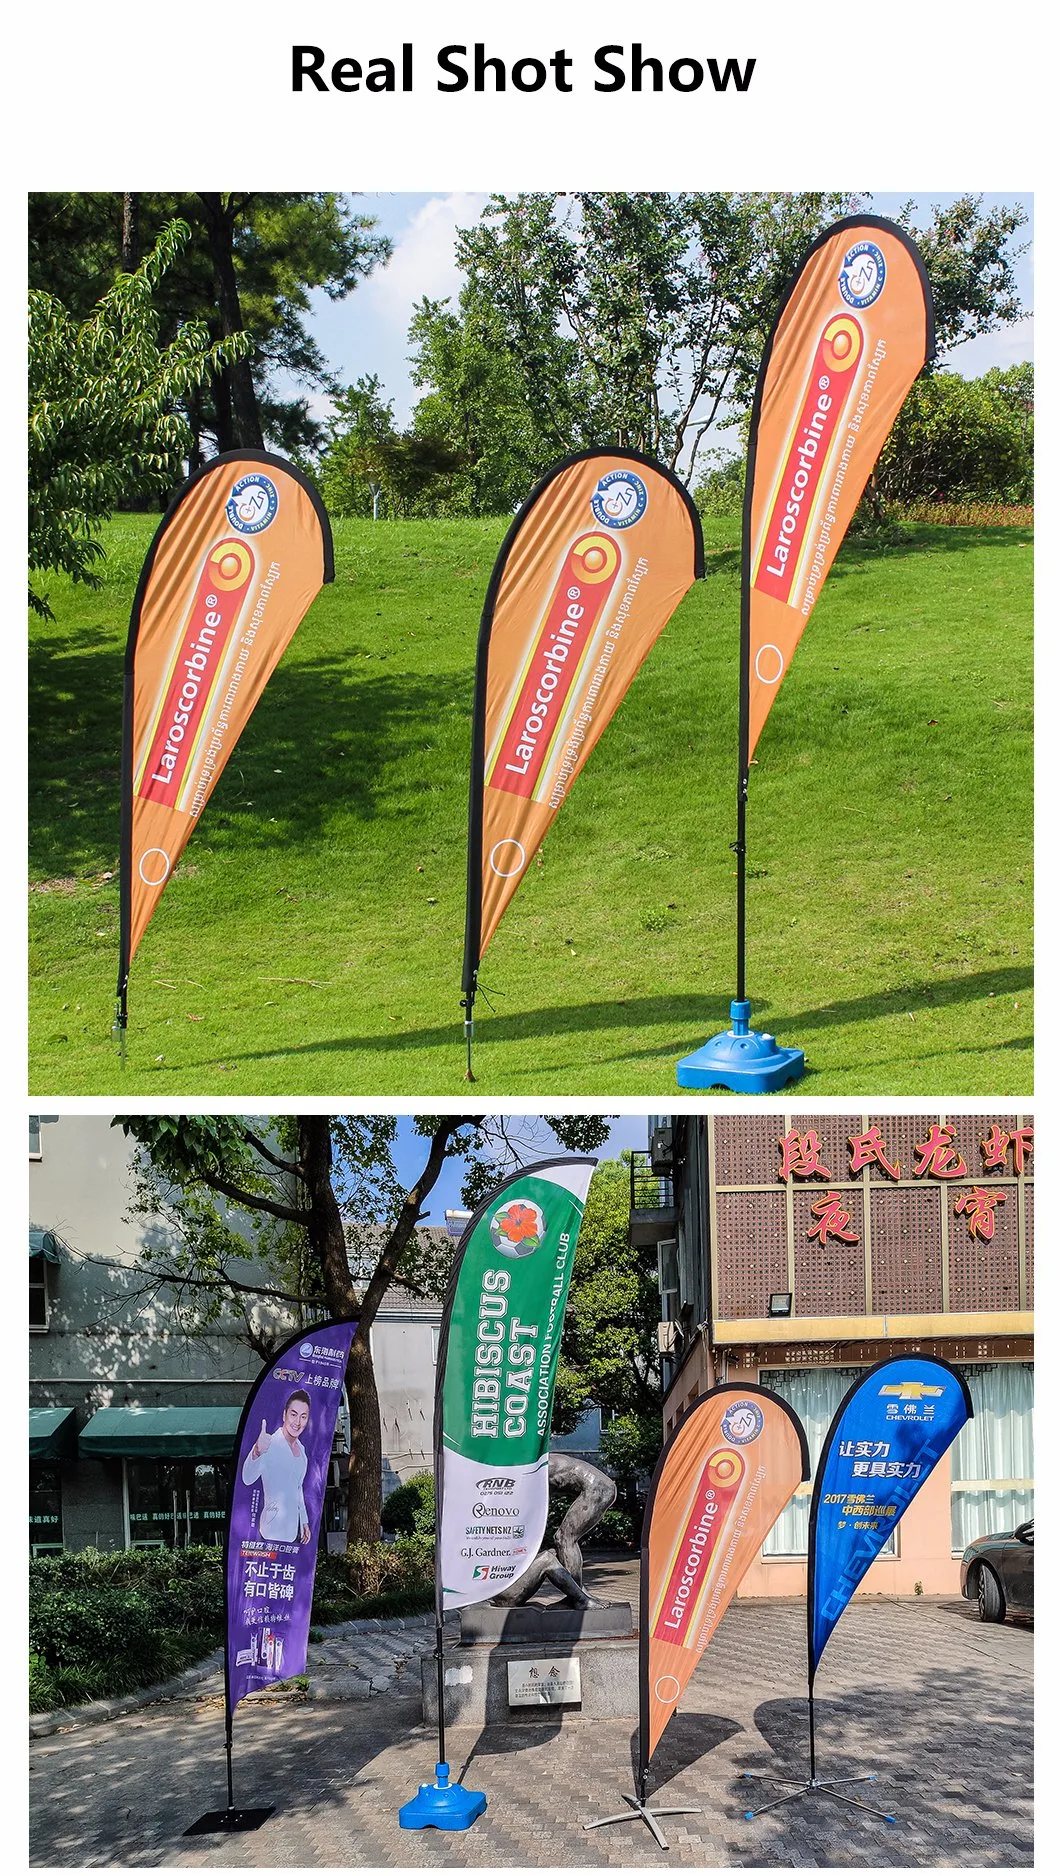 Printed Flags Feather Flags Sail Banners Display Stand Outdoor Flying Flag Banners